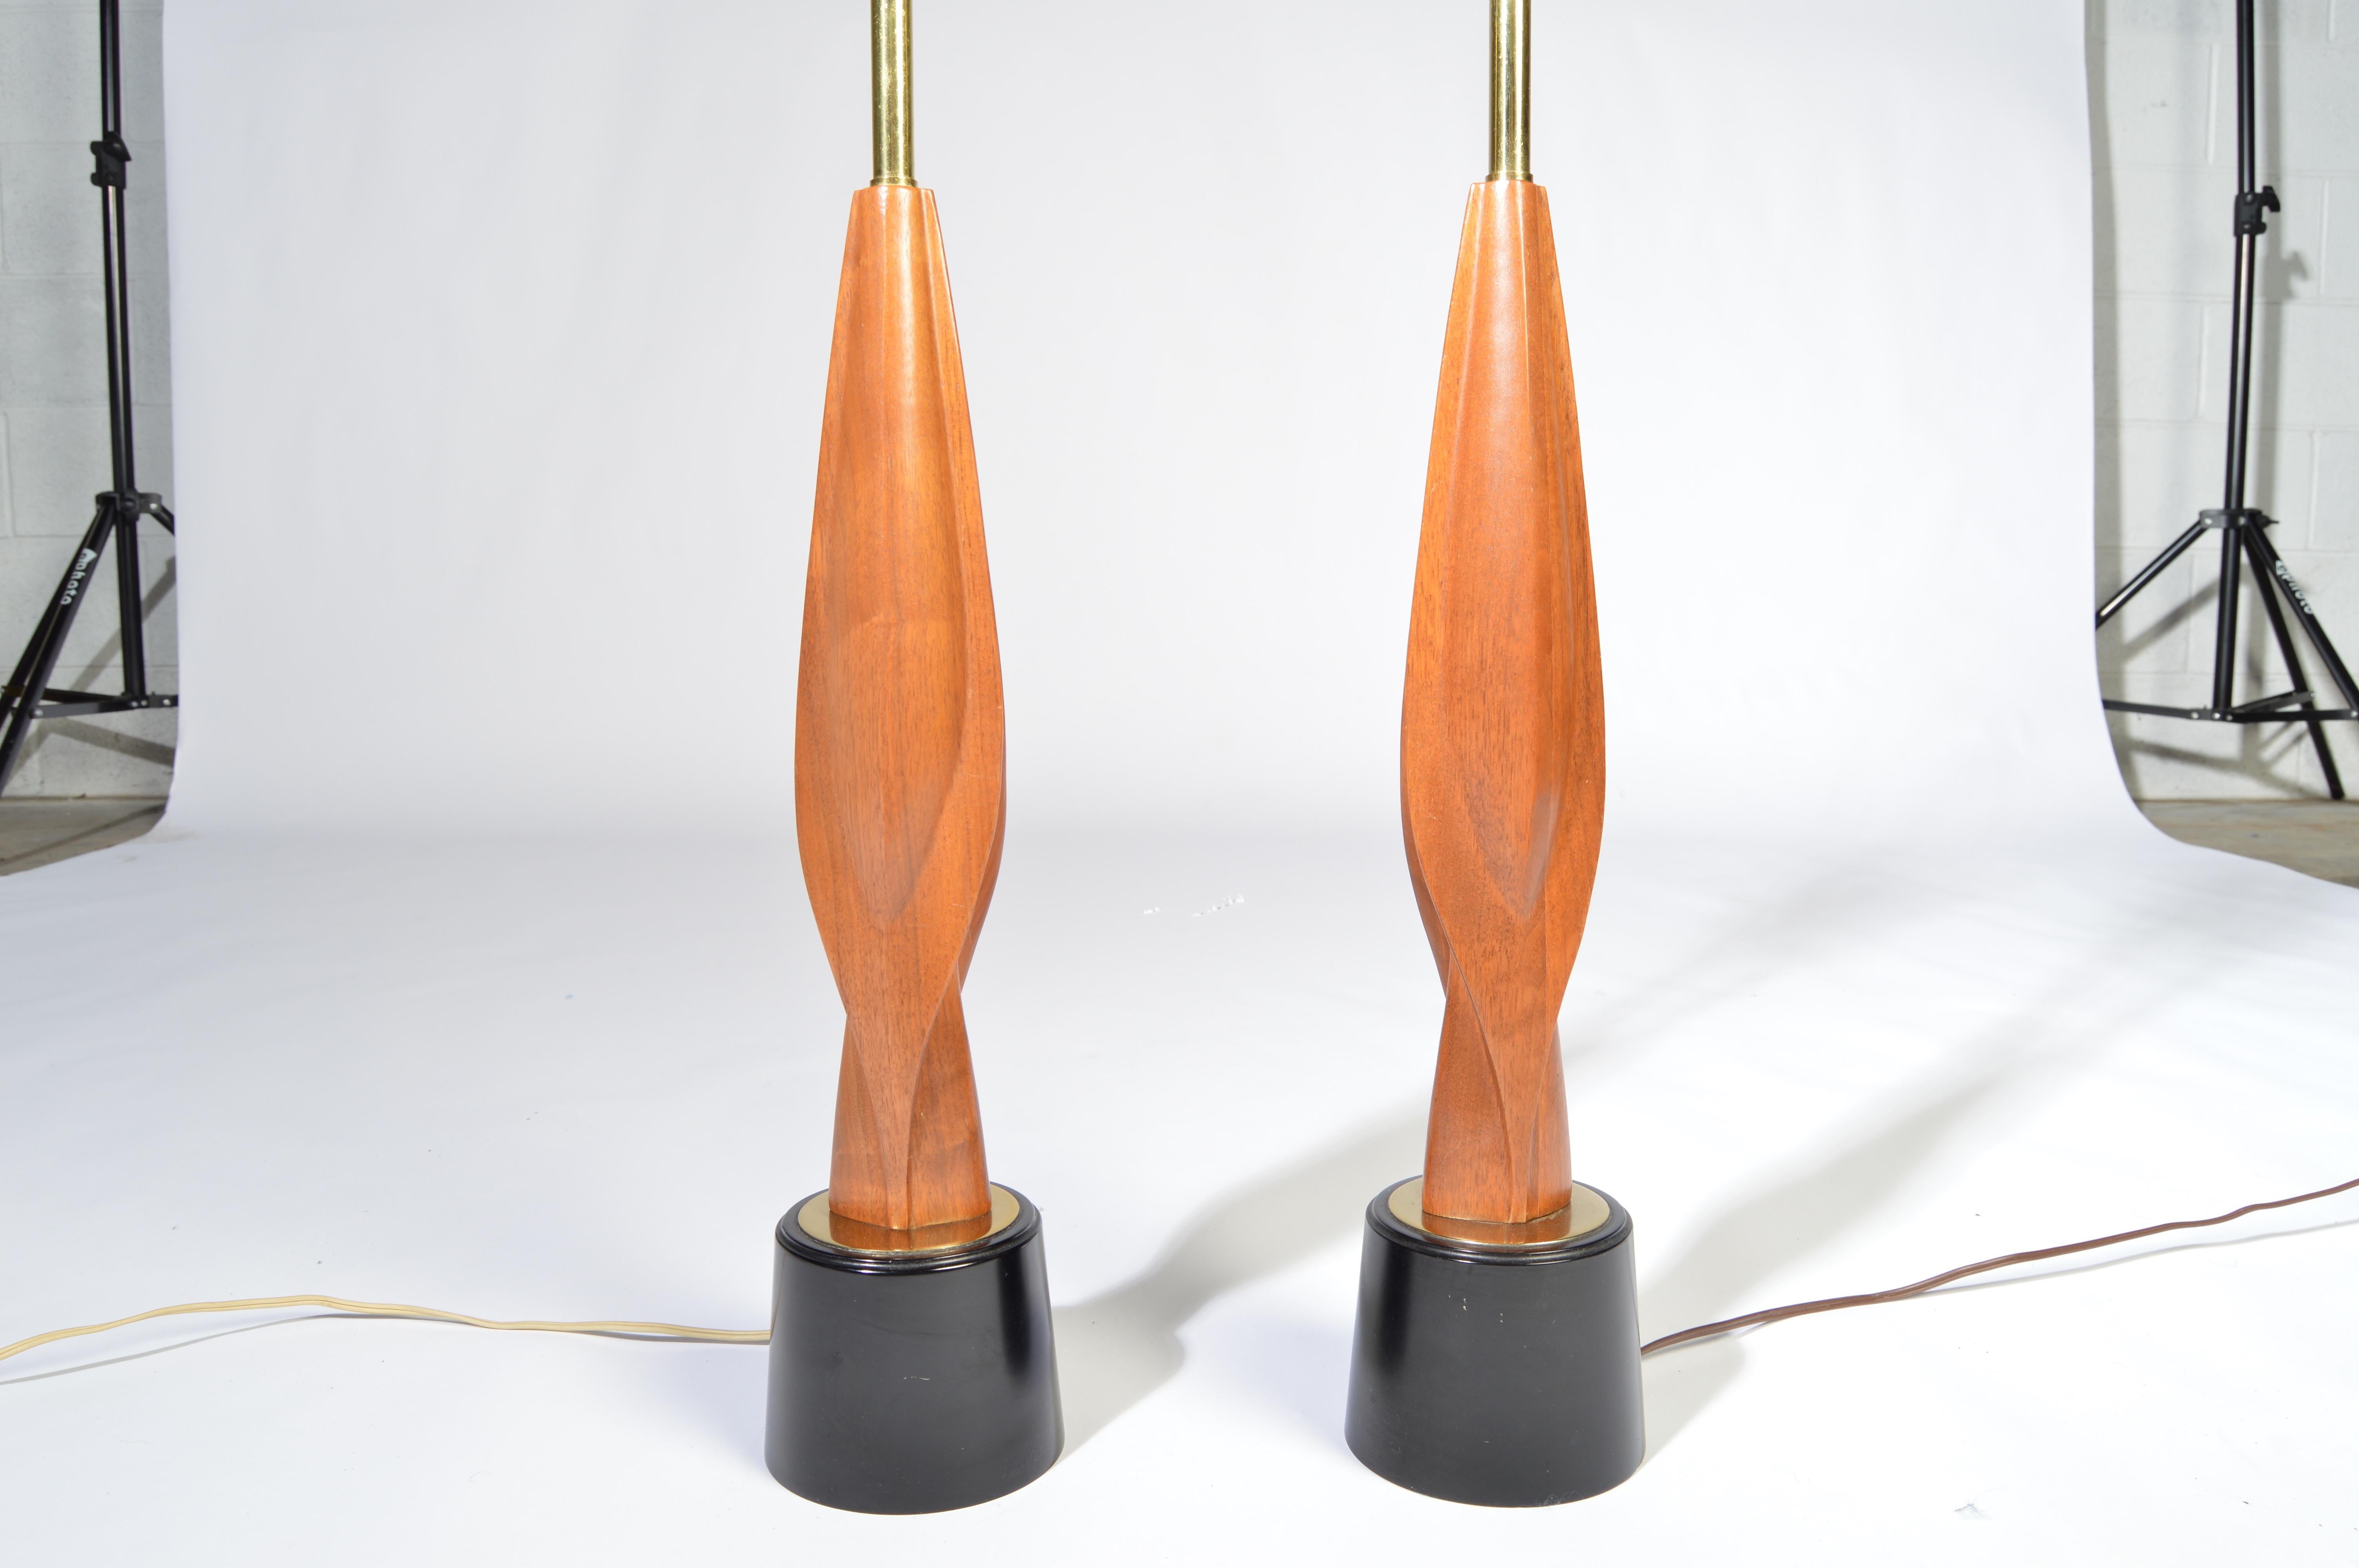 A beautiful pair of sculpted walnut table lamps by Laurel Lamp Co., circa 1960
Outstanding overall condition.
Sculpture height 16”
Sculpture width 4